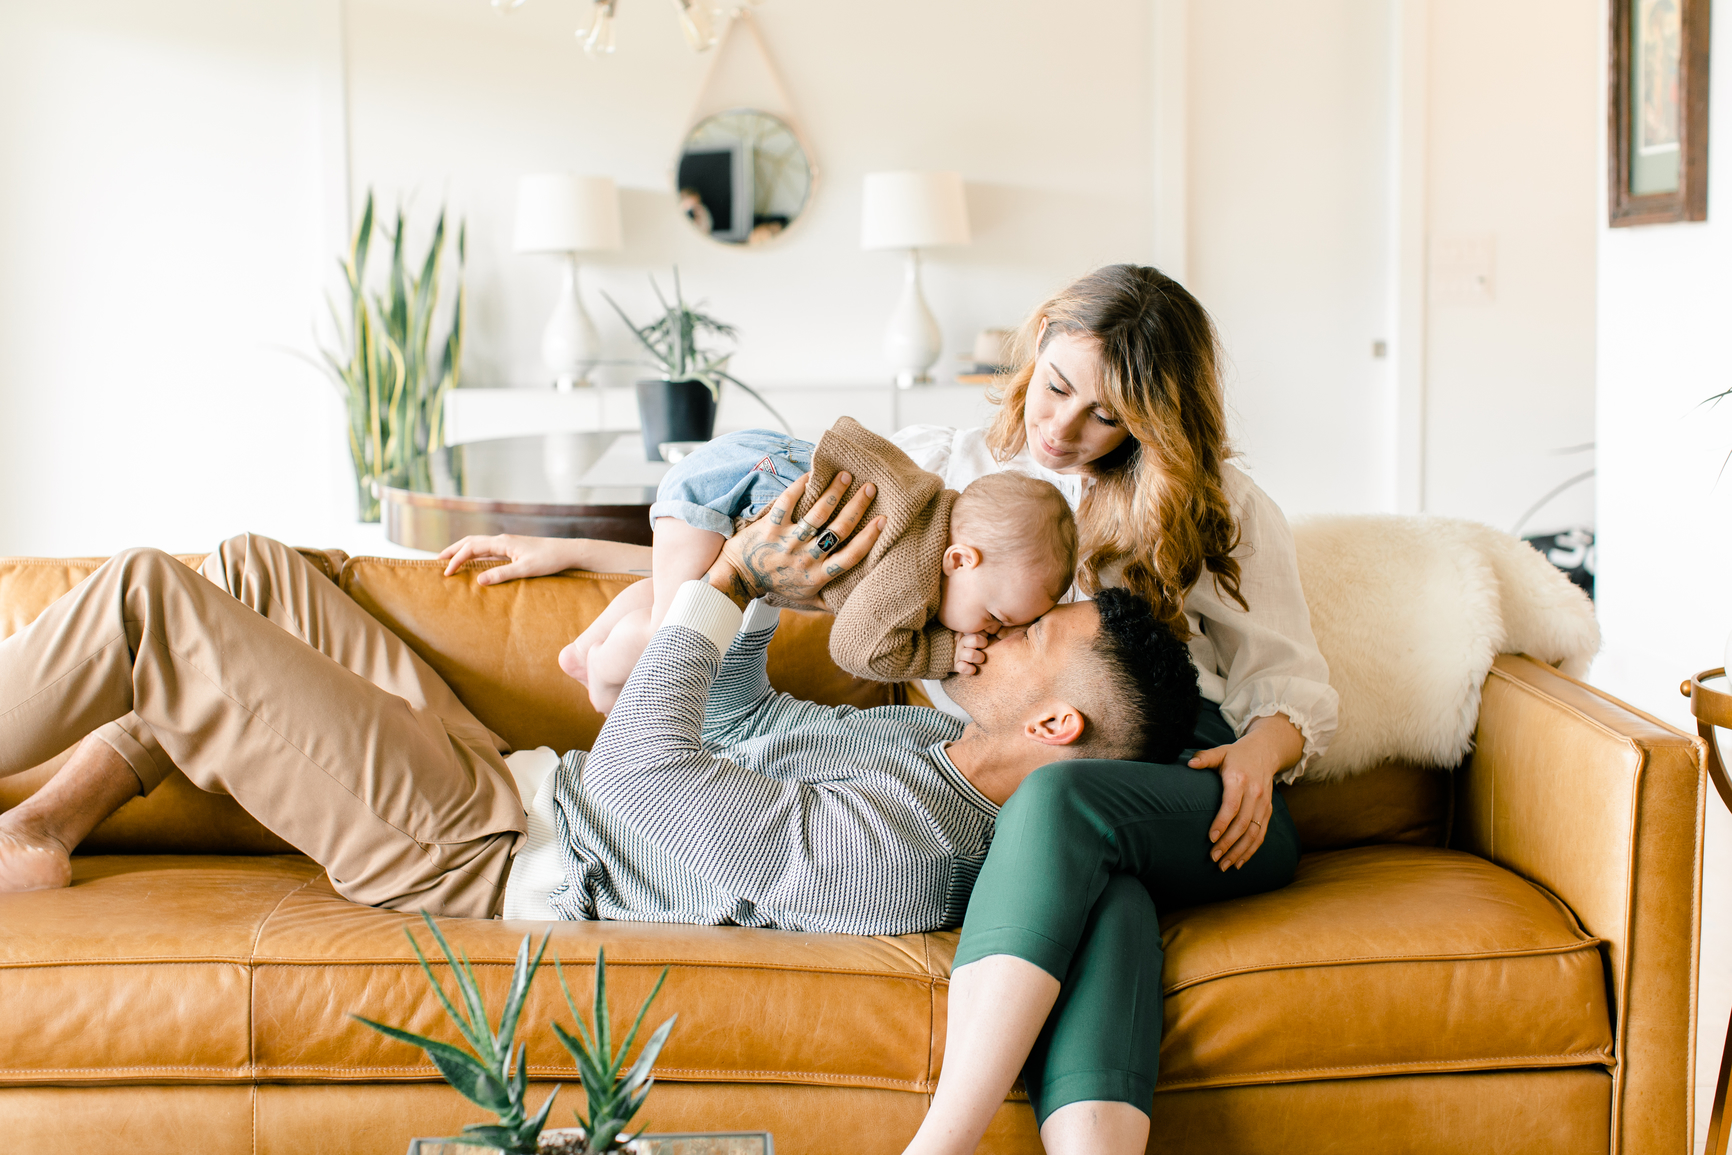 Picture of a young family on their couch. The husband is playing with a baby, and the wife is working on her laptop.